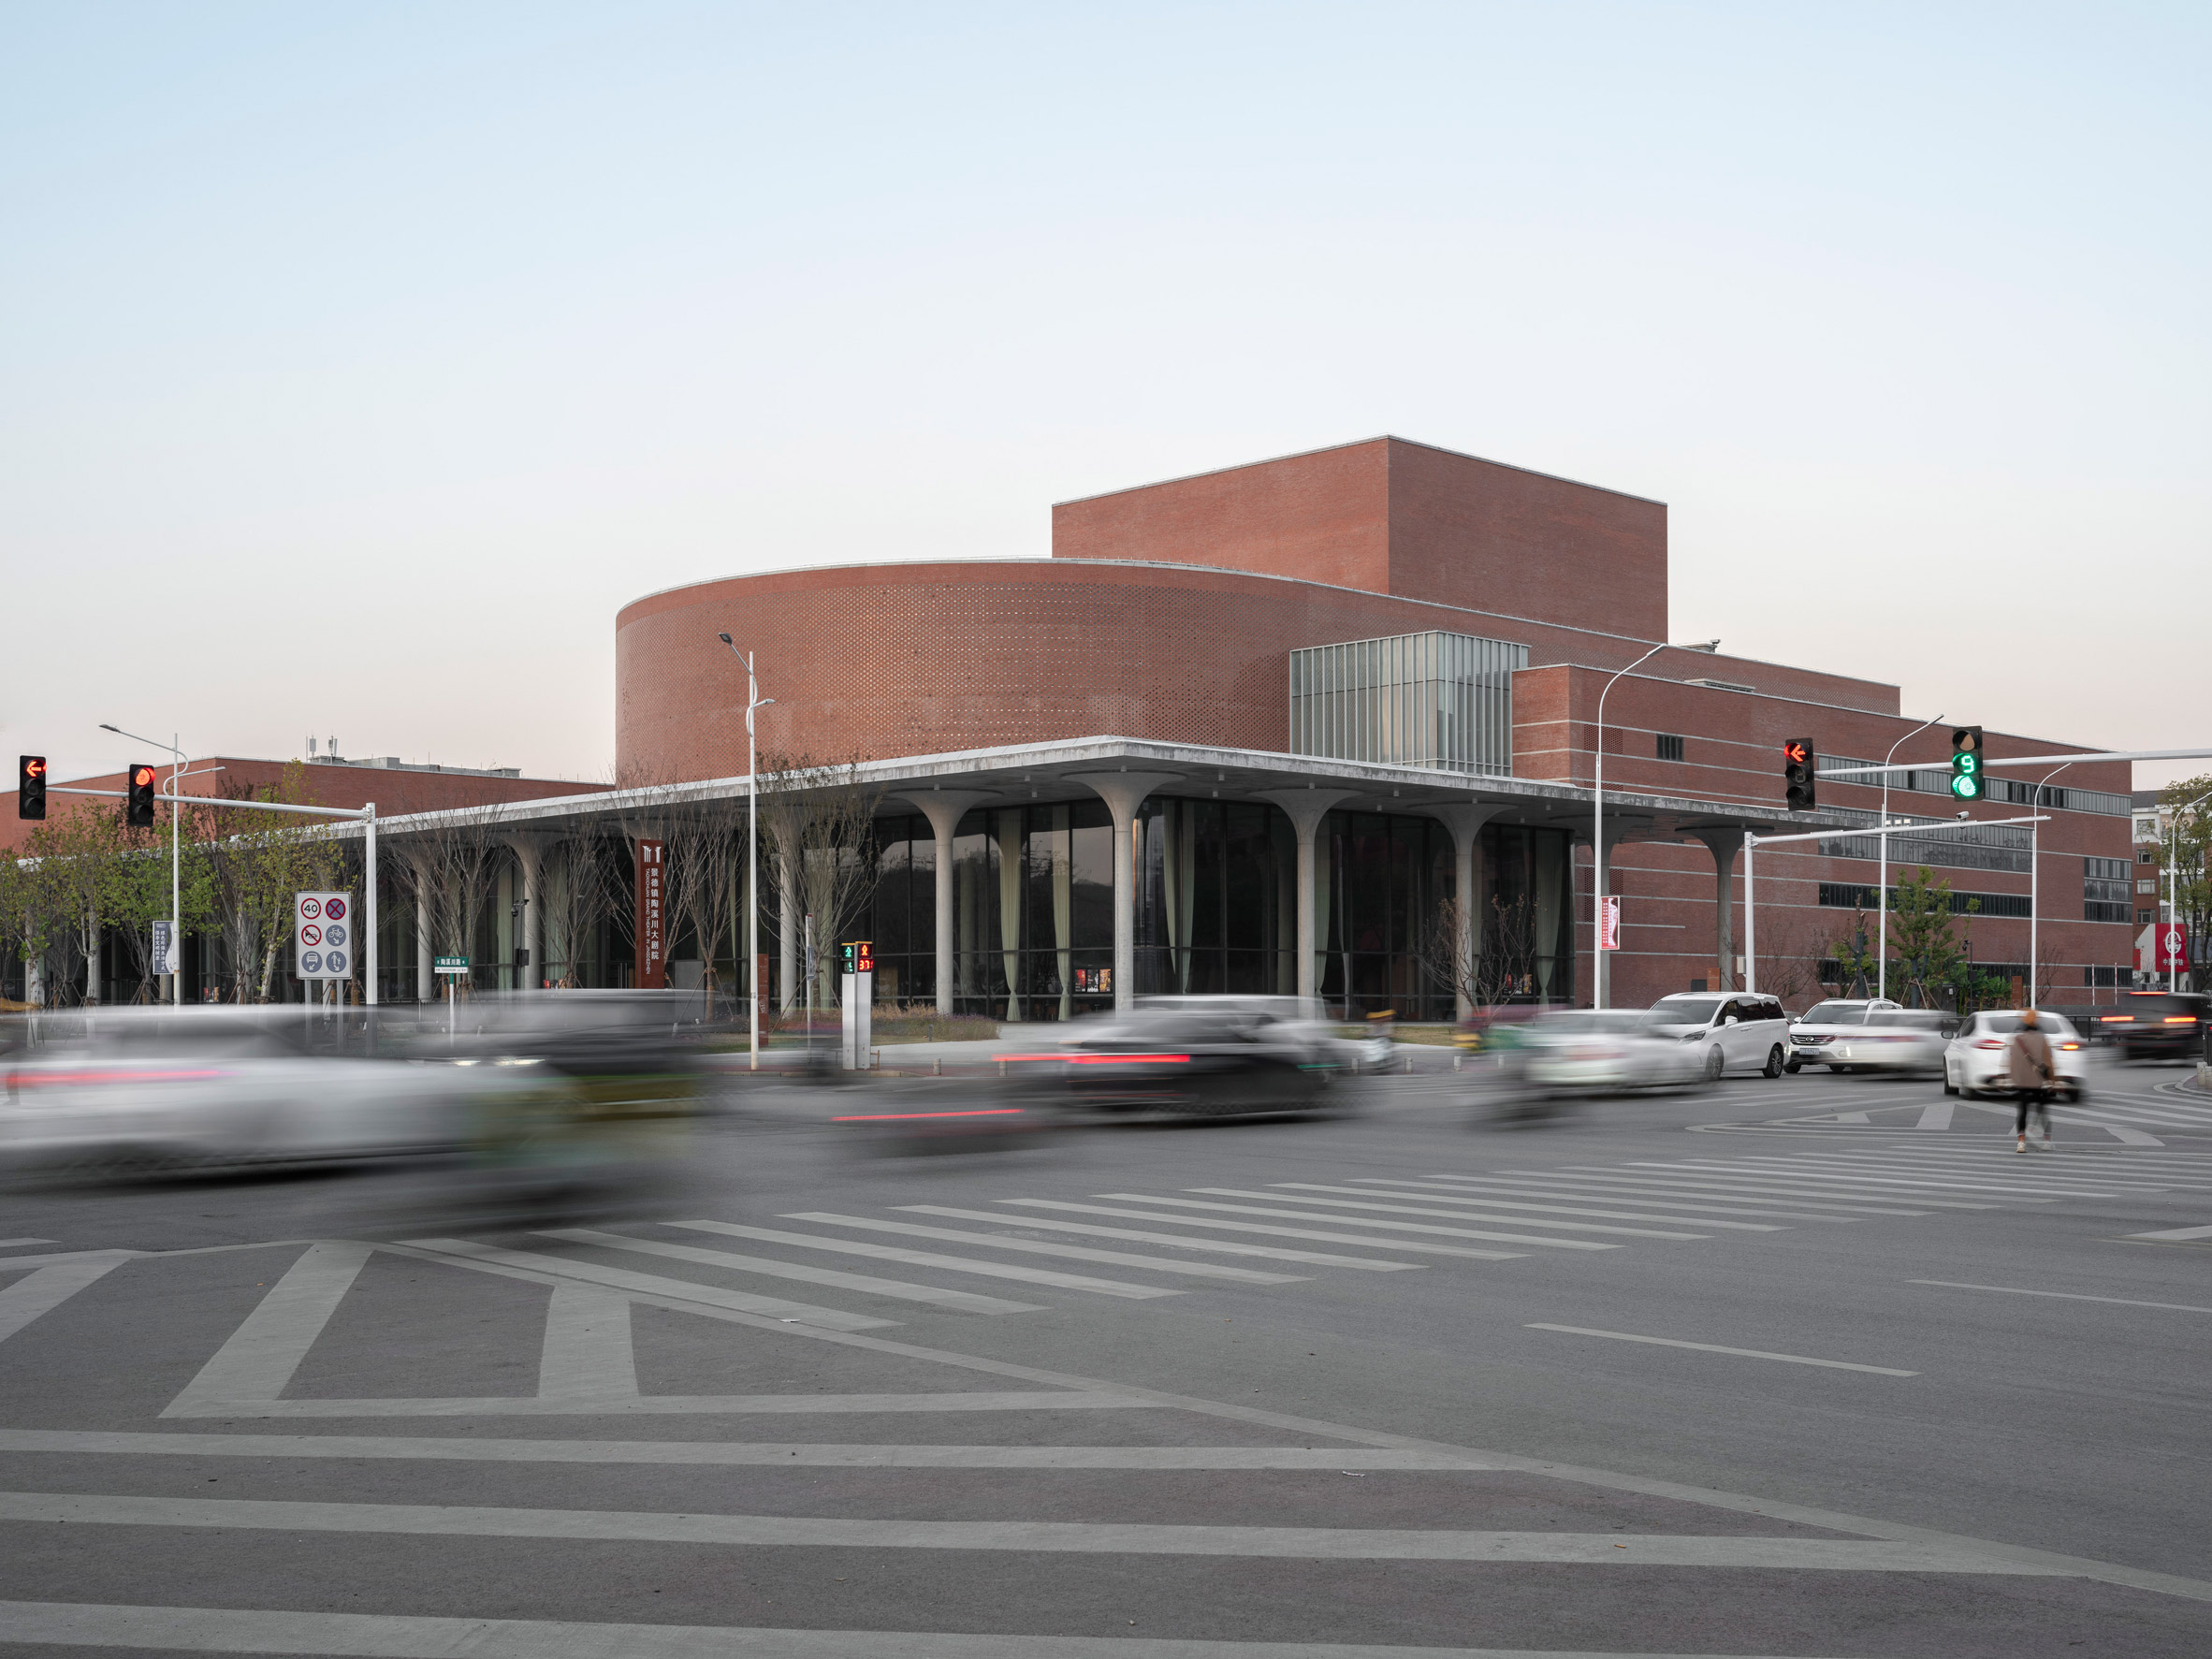 Grand Theatre, Ceramic Art Avenue Taoxichuan by David Chipperfield Architects